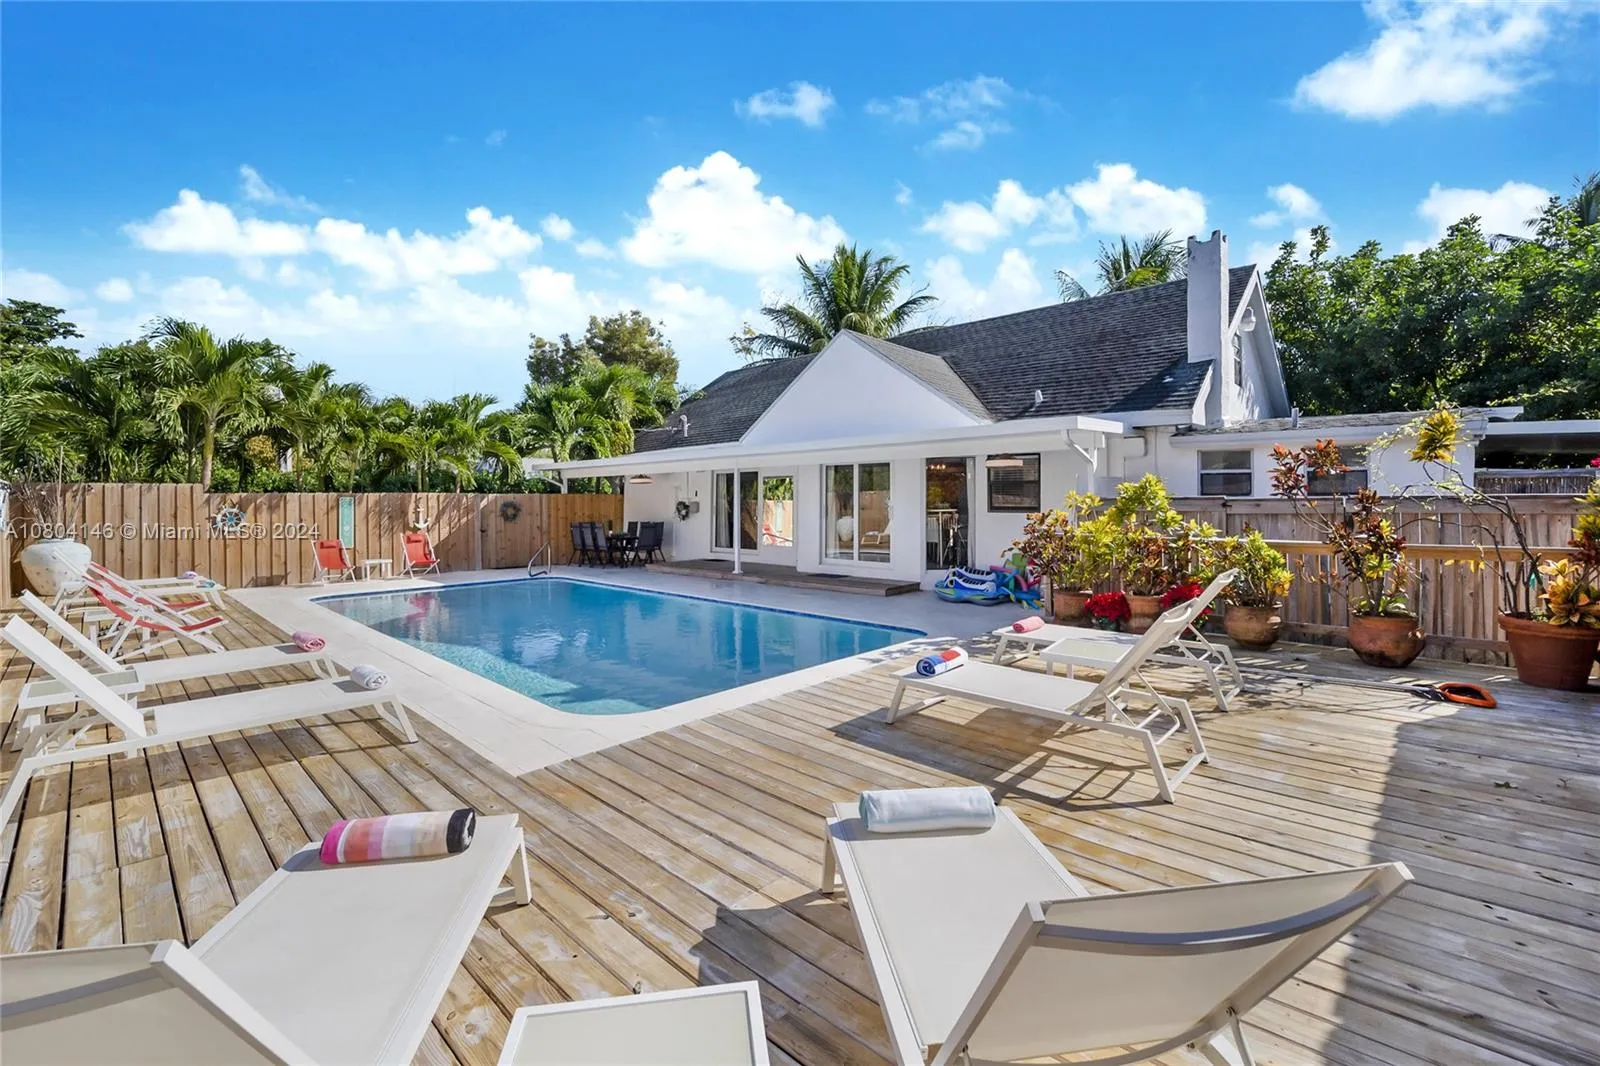 Great pool deck with lots of chaise lounges.